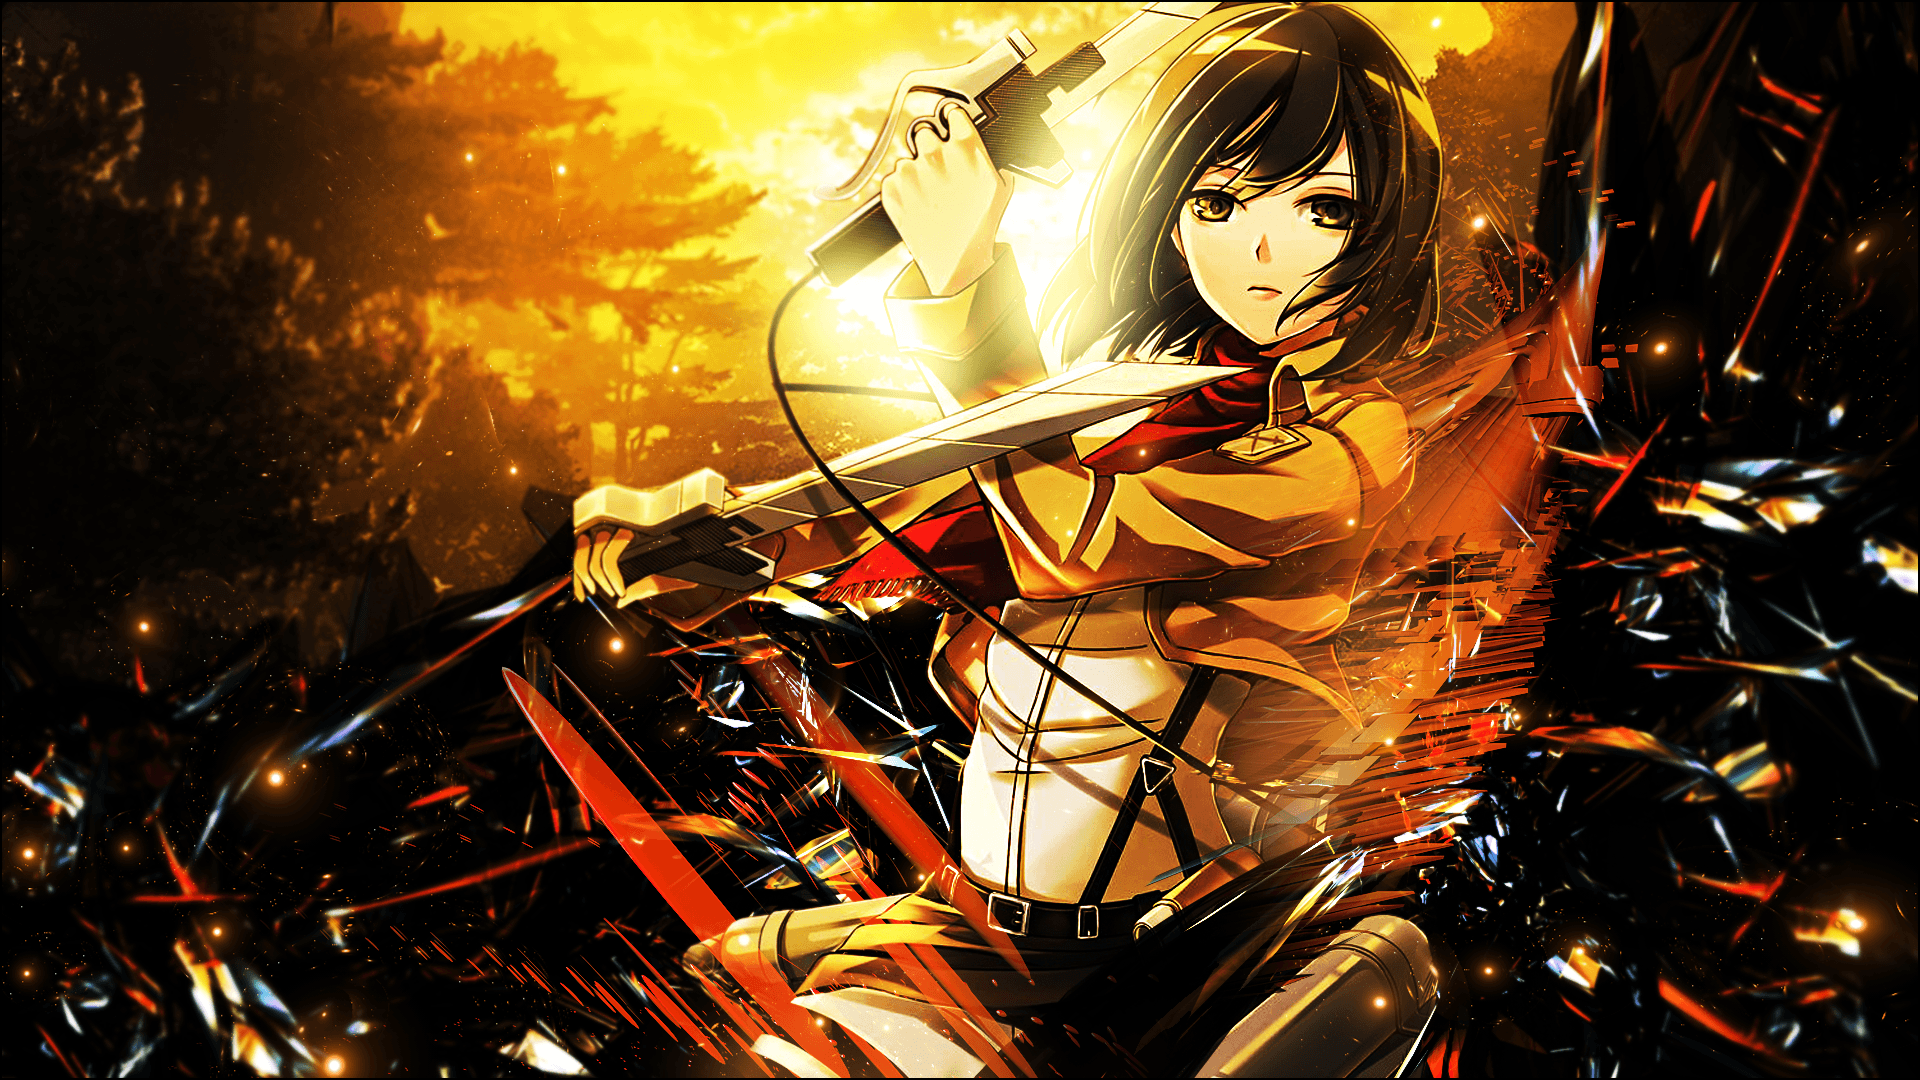 View, download, comment, and rate this 1920x1080 Mikasa Ackerman